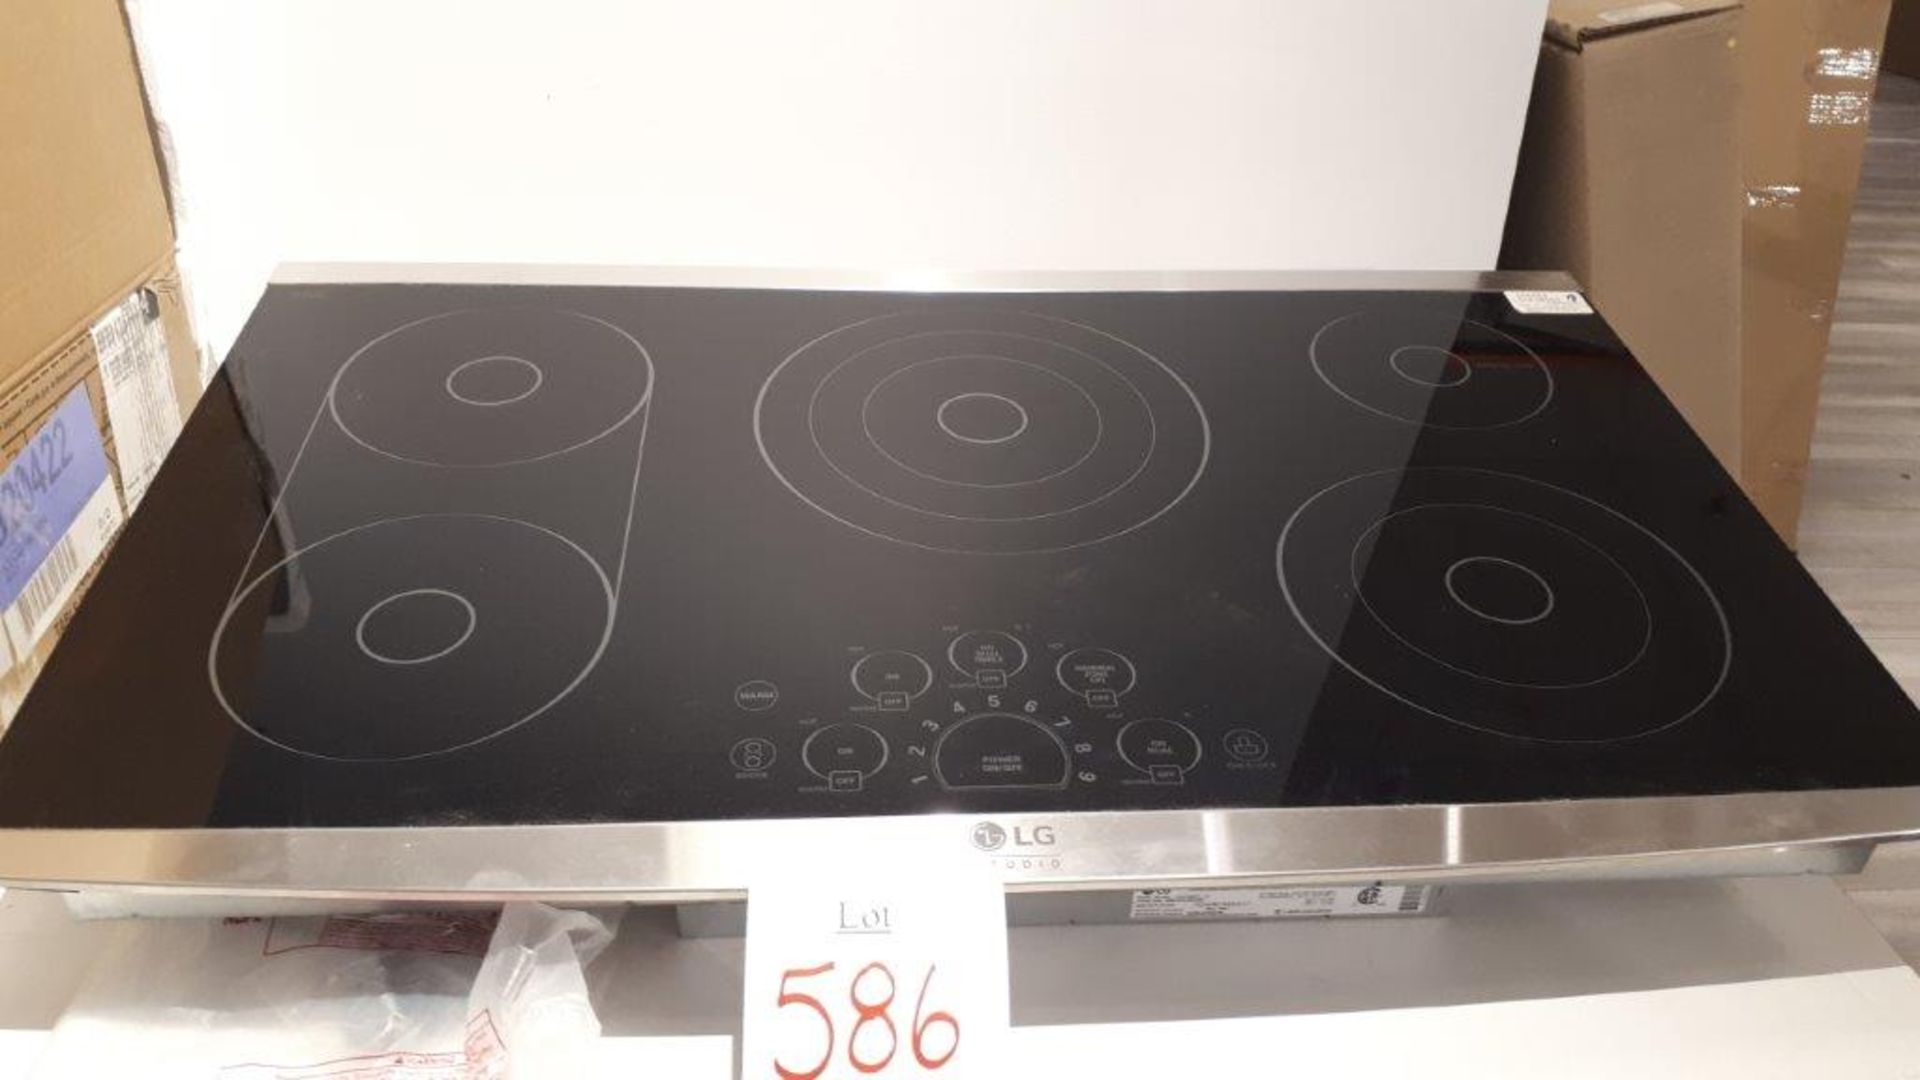 LG LSCE365ST 36” stainless steel electric cooktop, showroom demo